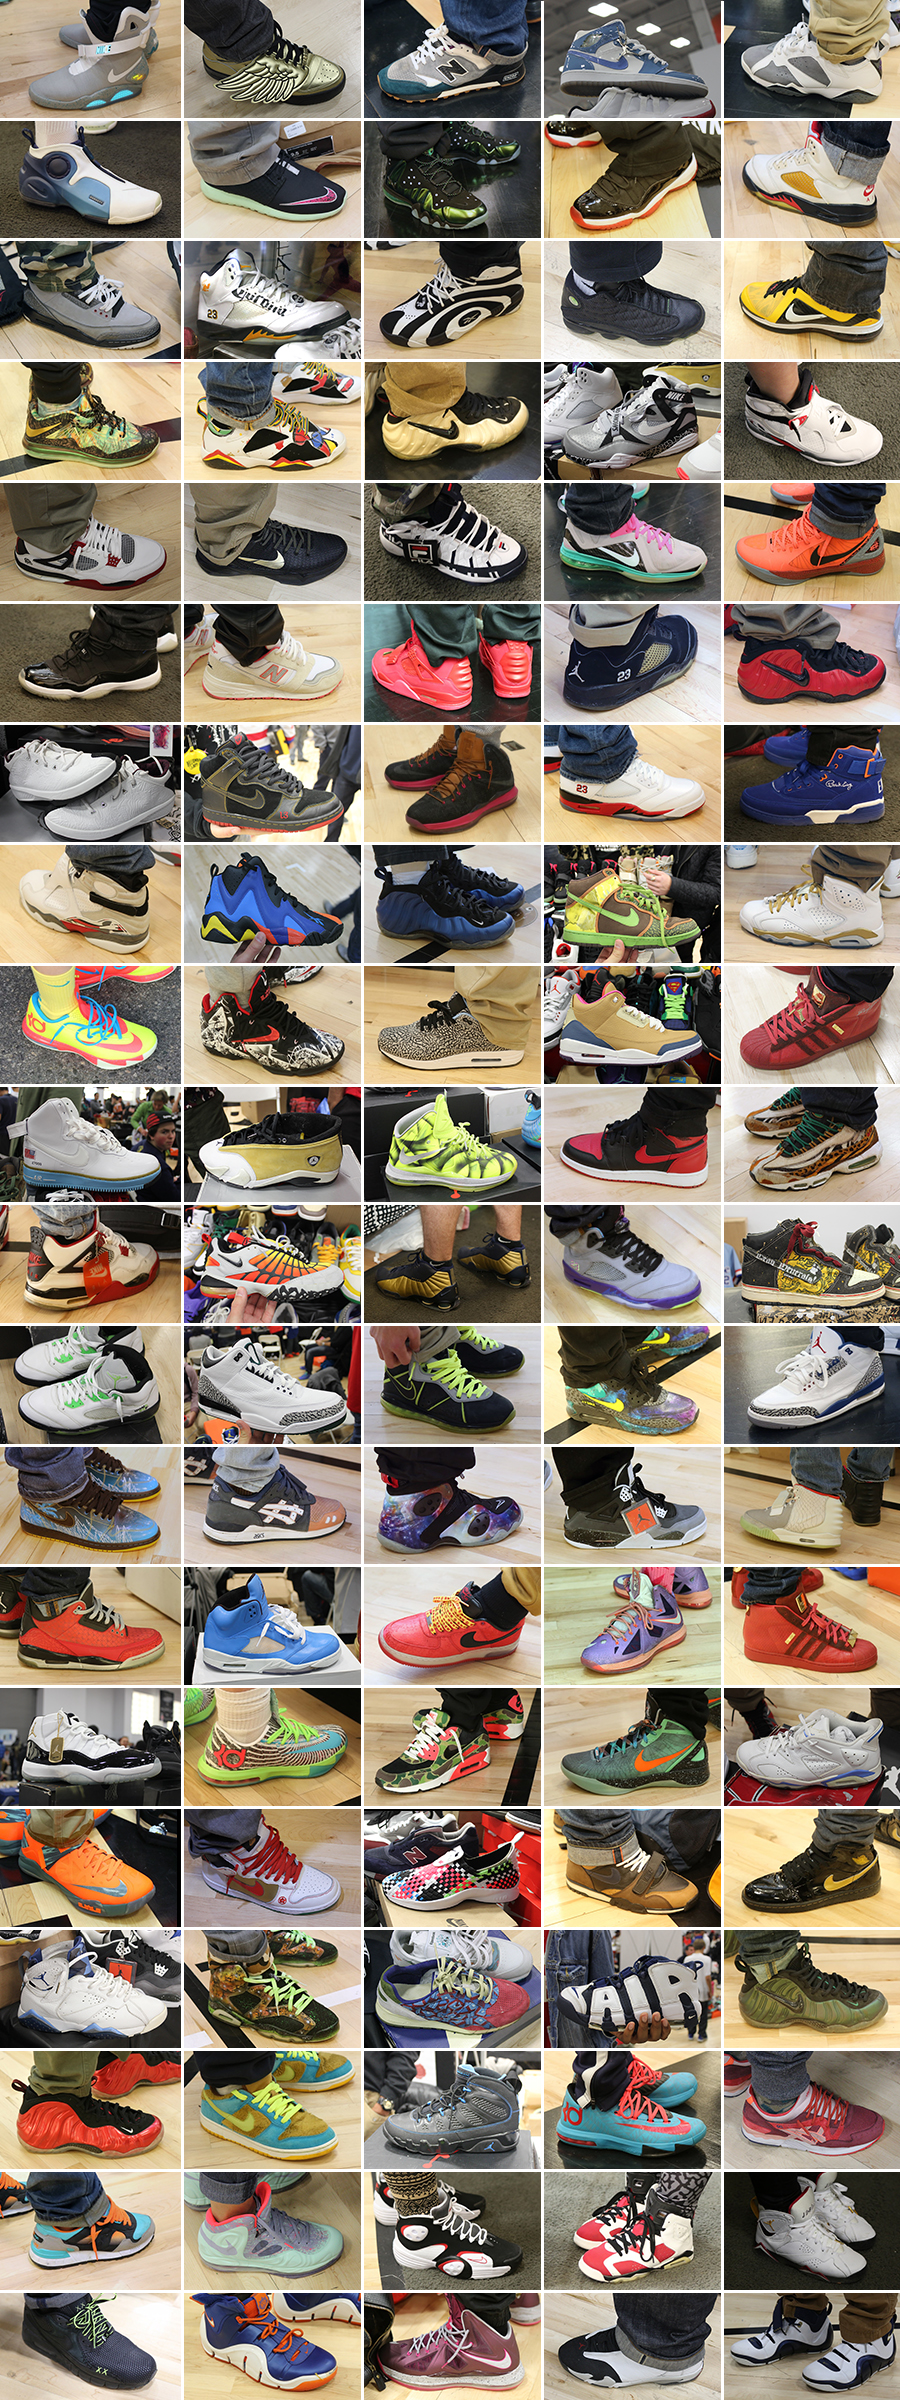 500 Shoes At Sneaker Con 02